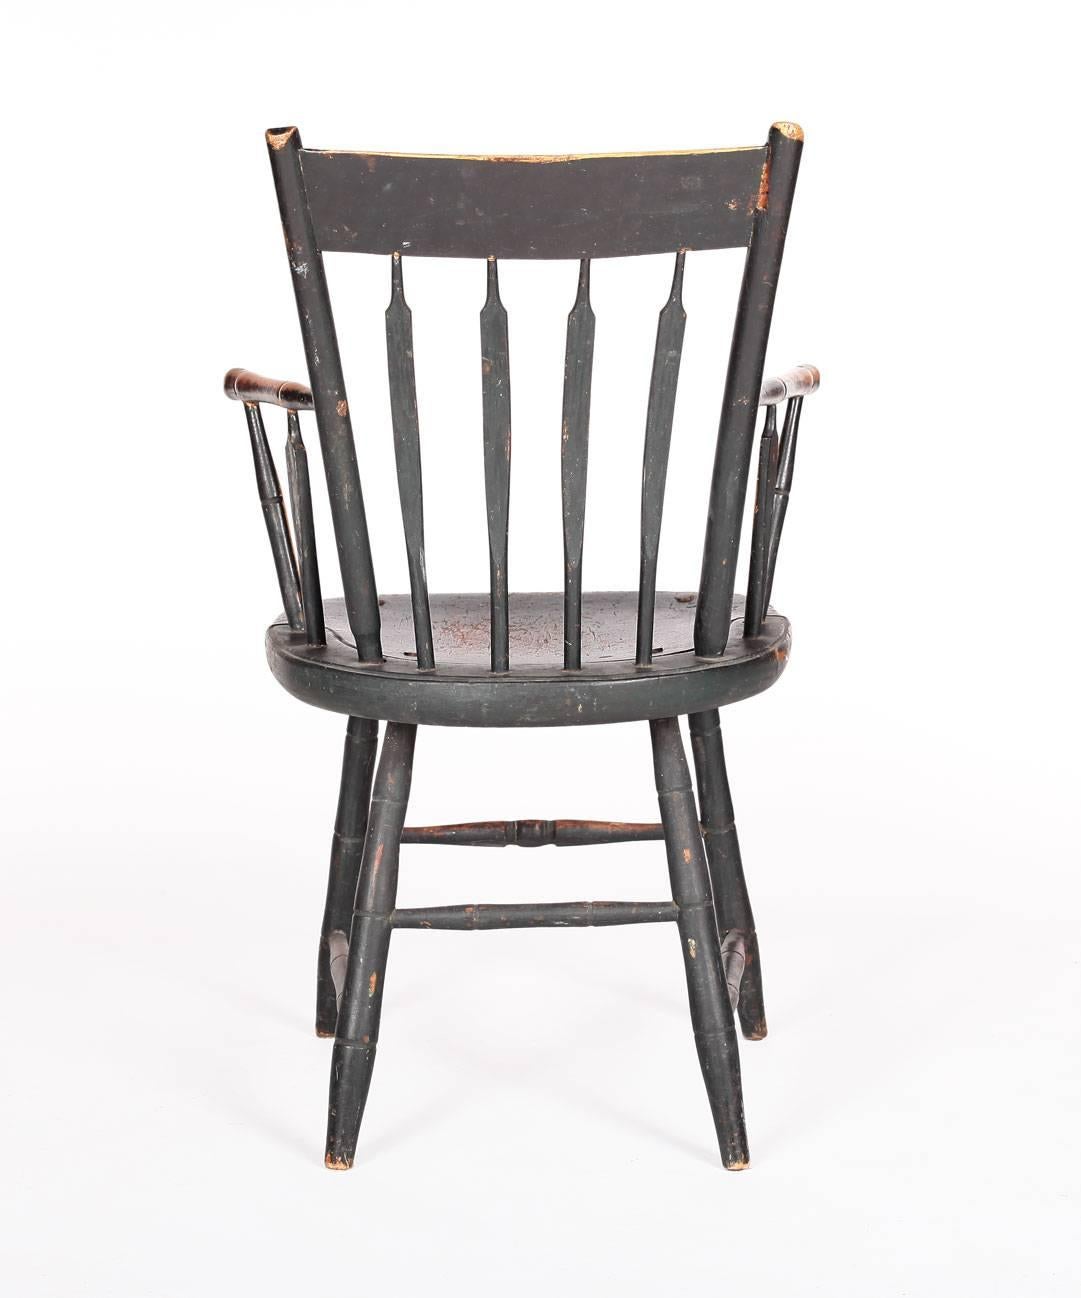 Antique American Windsor Chair with Original Paint, 19th Century In Good Condition For Sale In Wilmington, DE